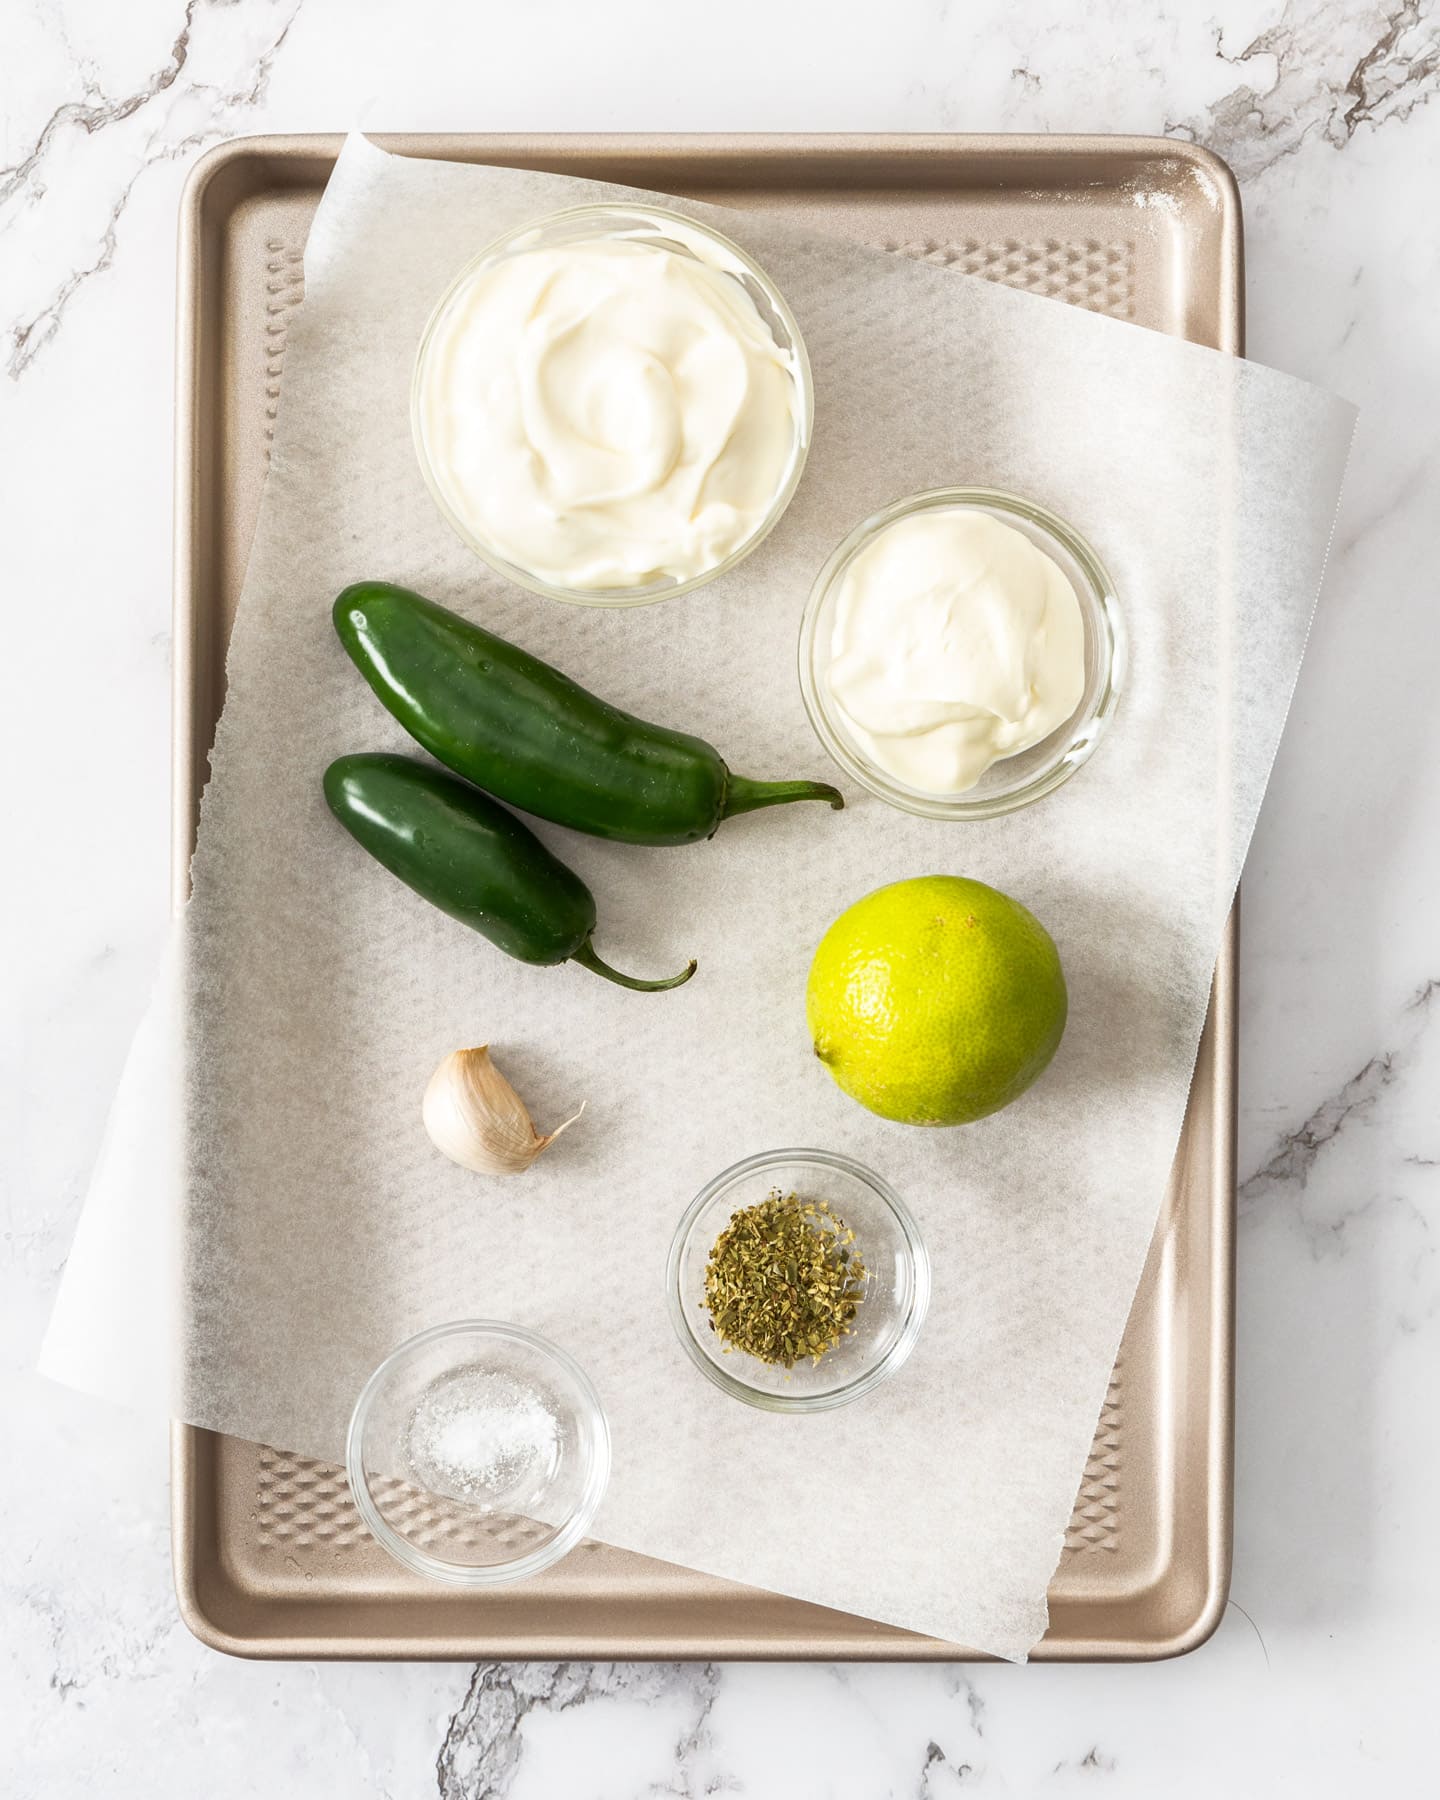 Ingredients for jalapeno mayo on a baking tray.